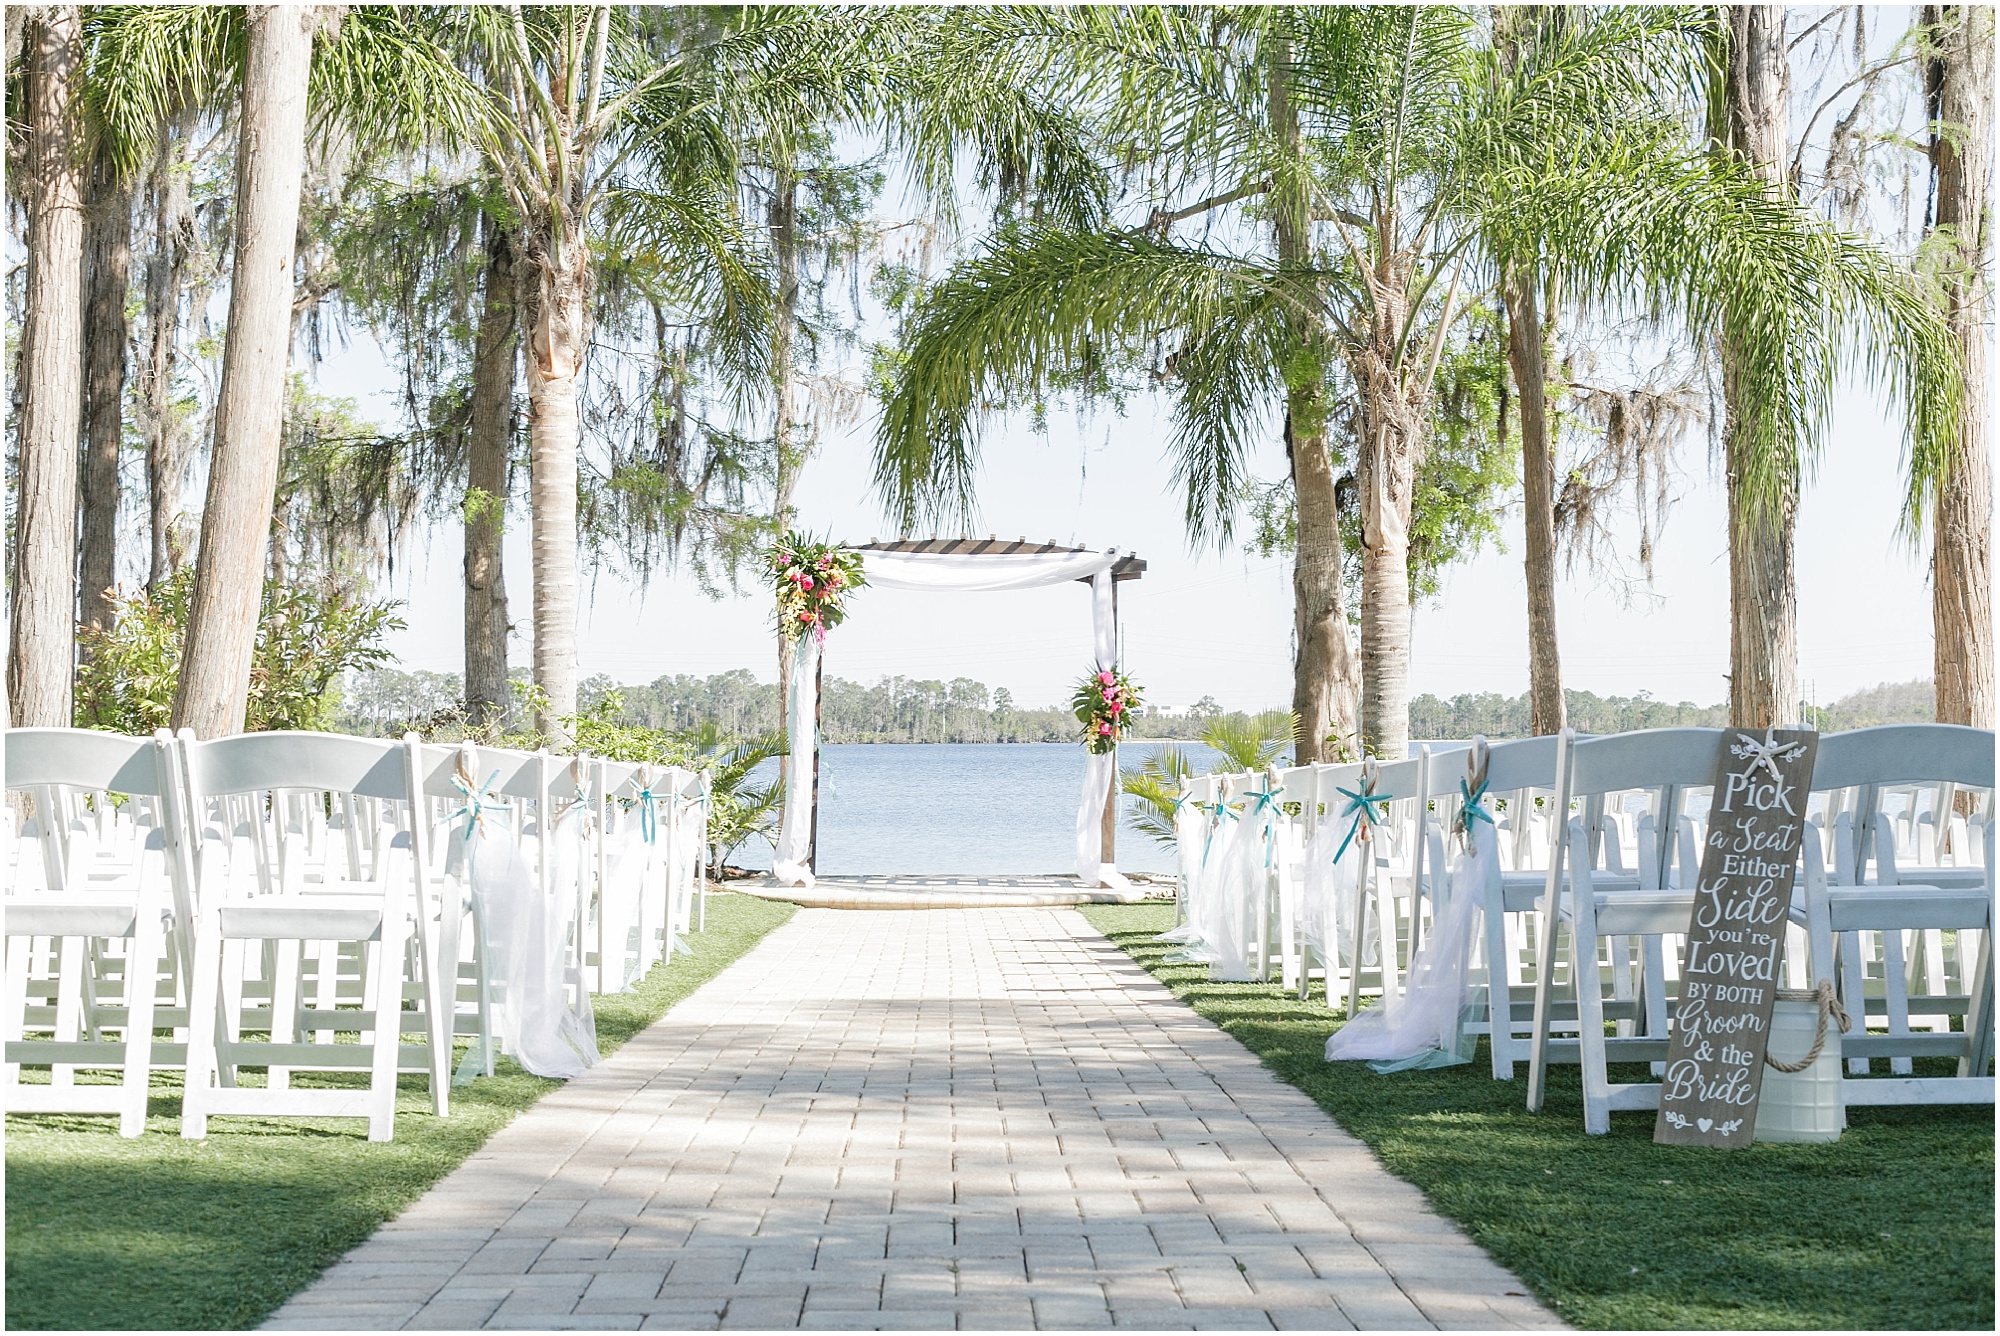 Ceremony space at Paradise Cove Orlando.